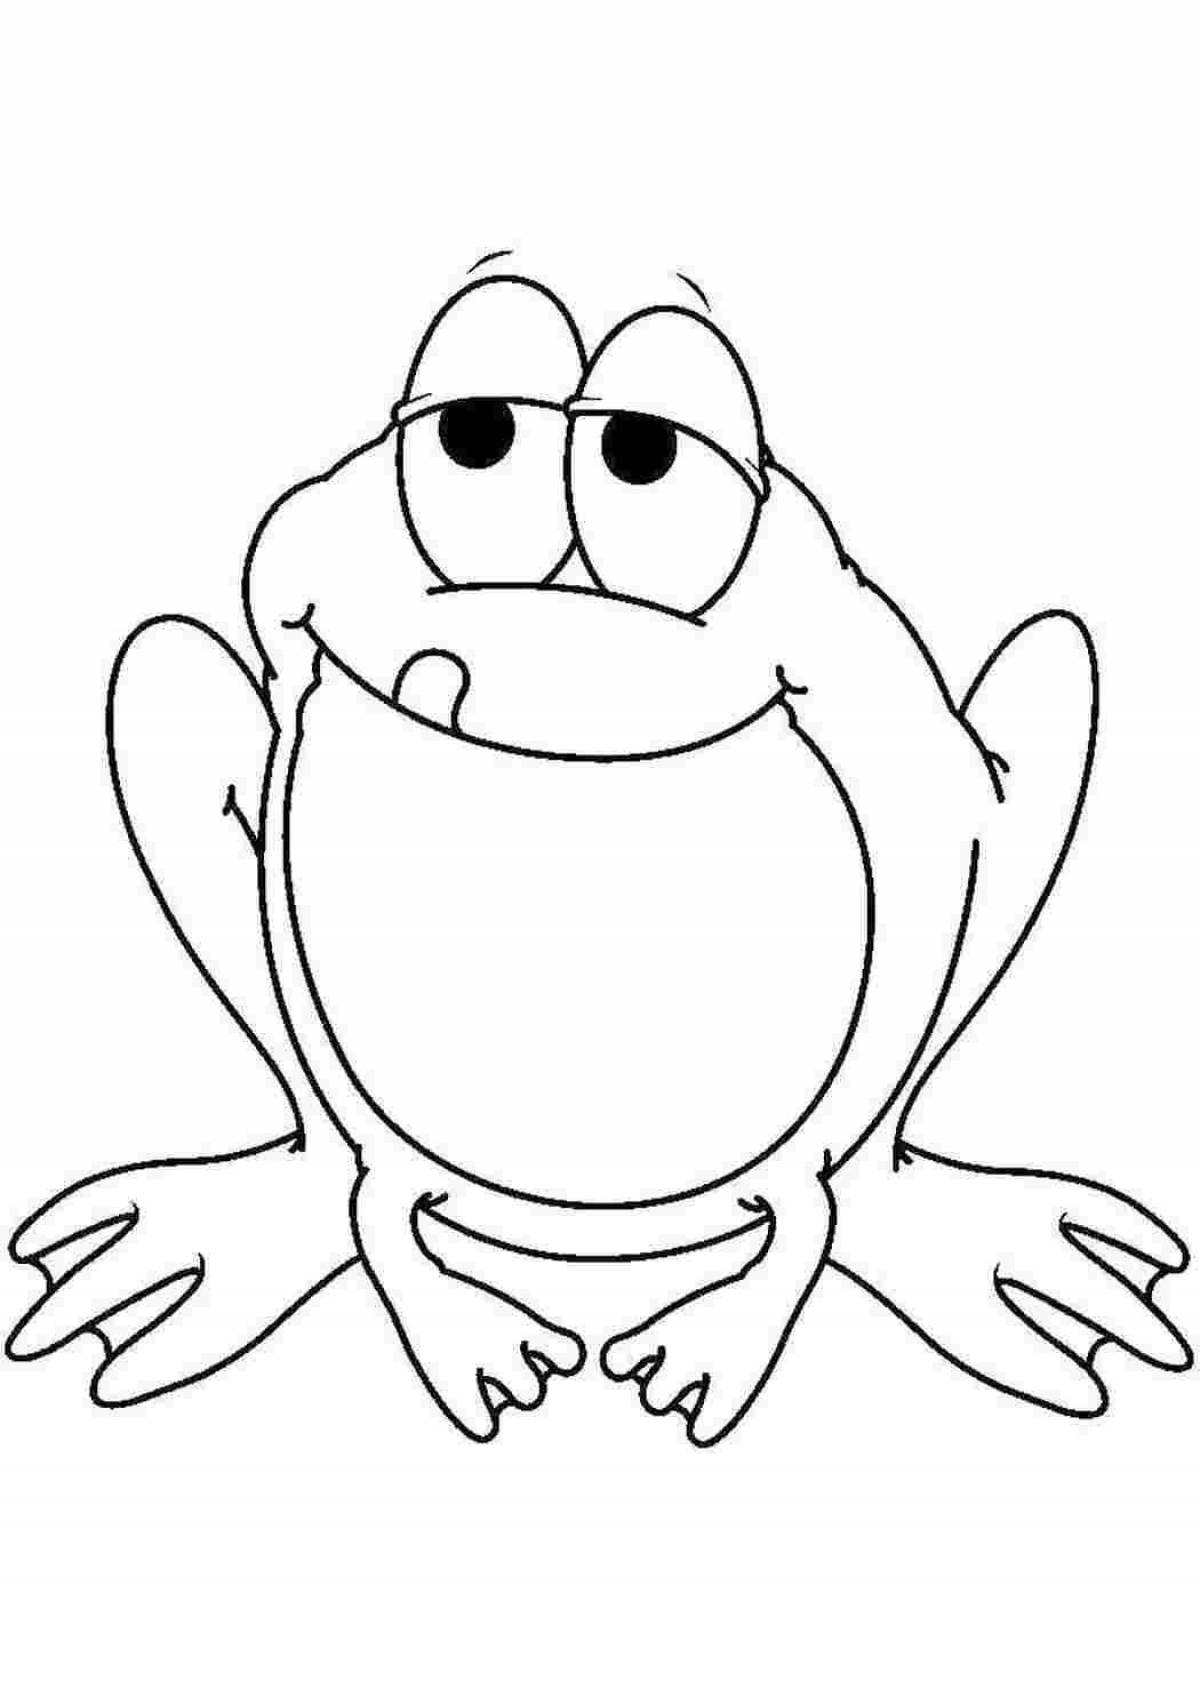 Magic frog coloring pages